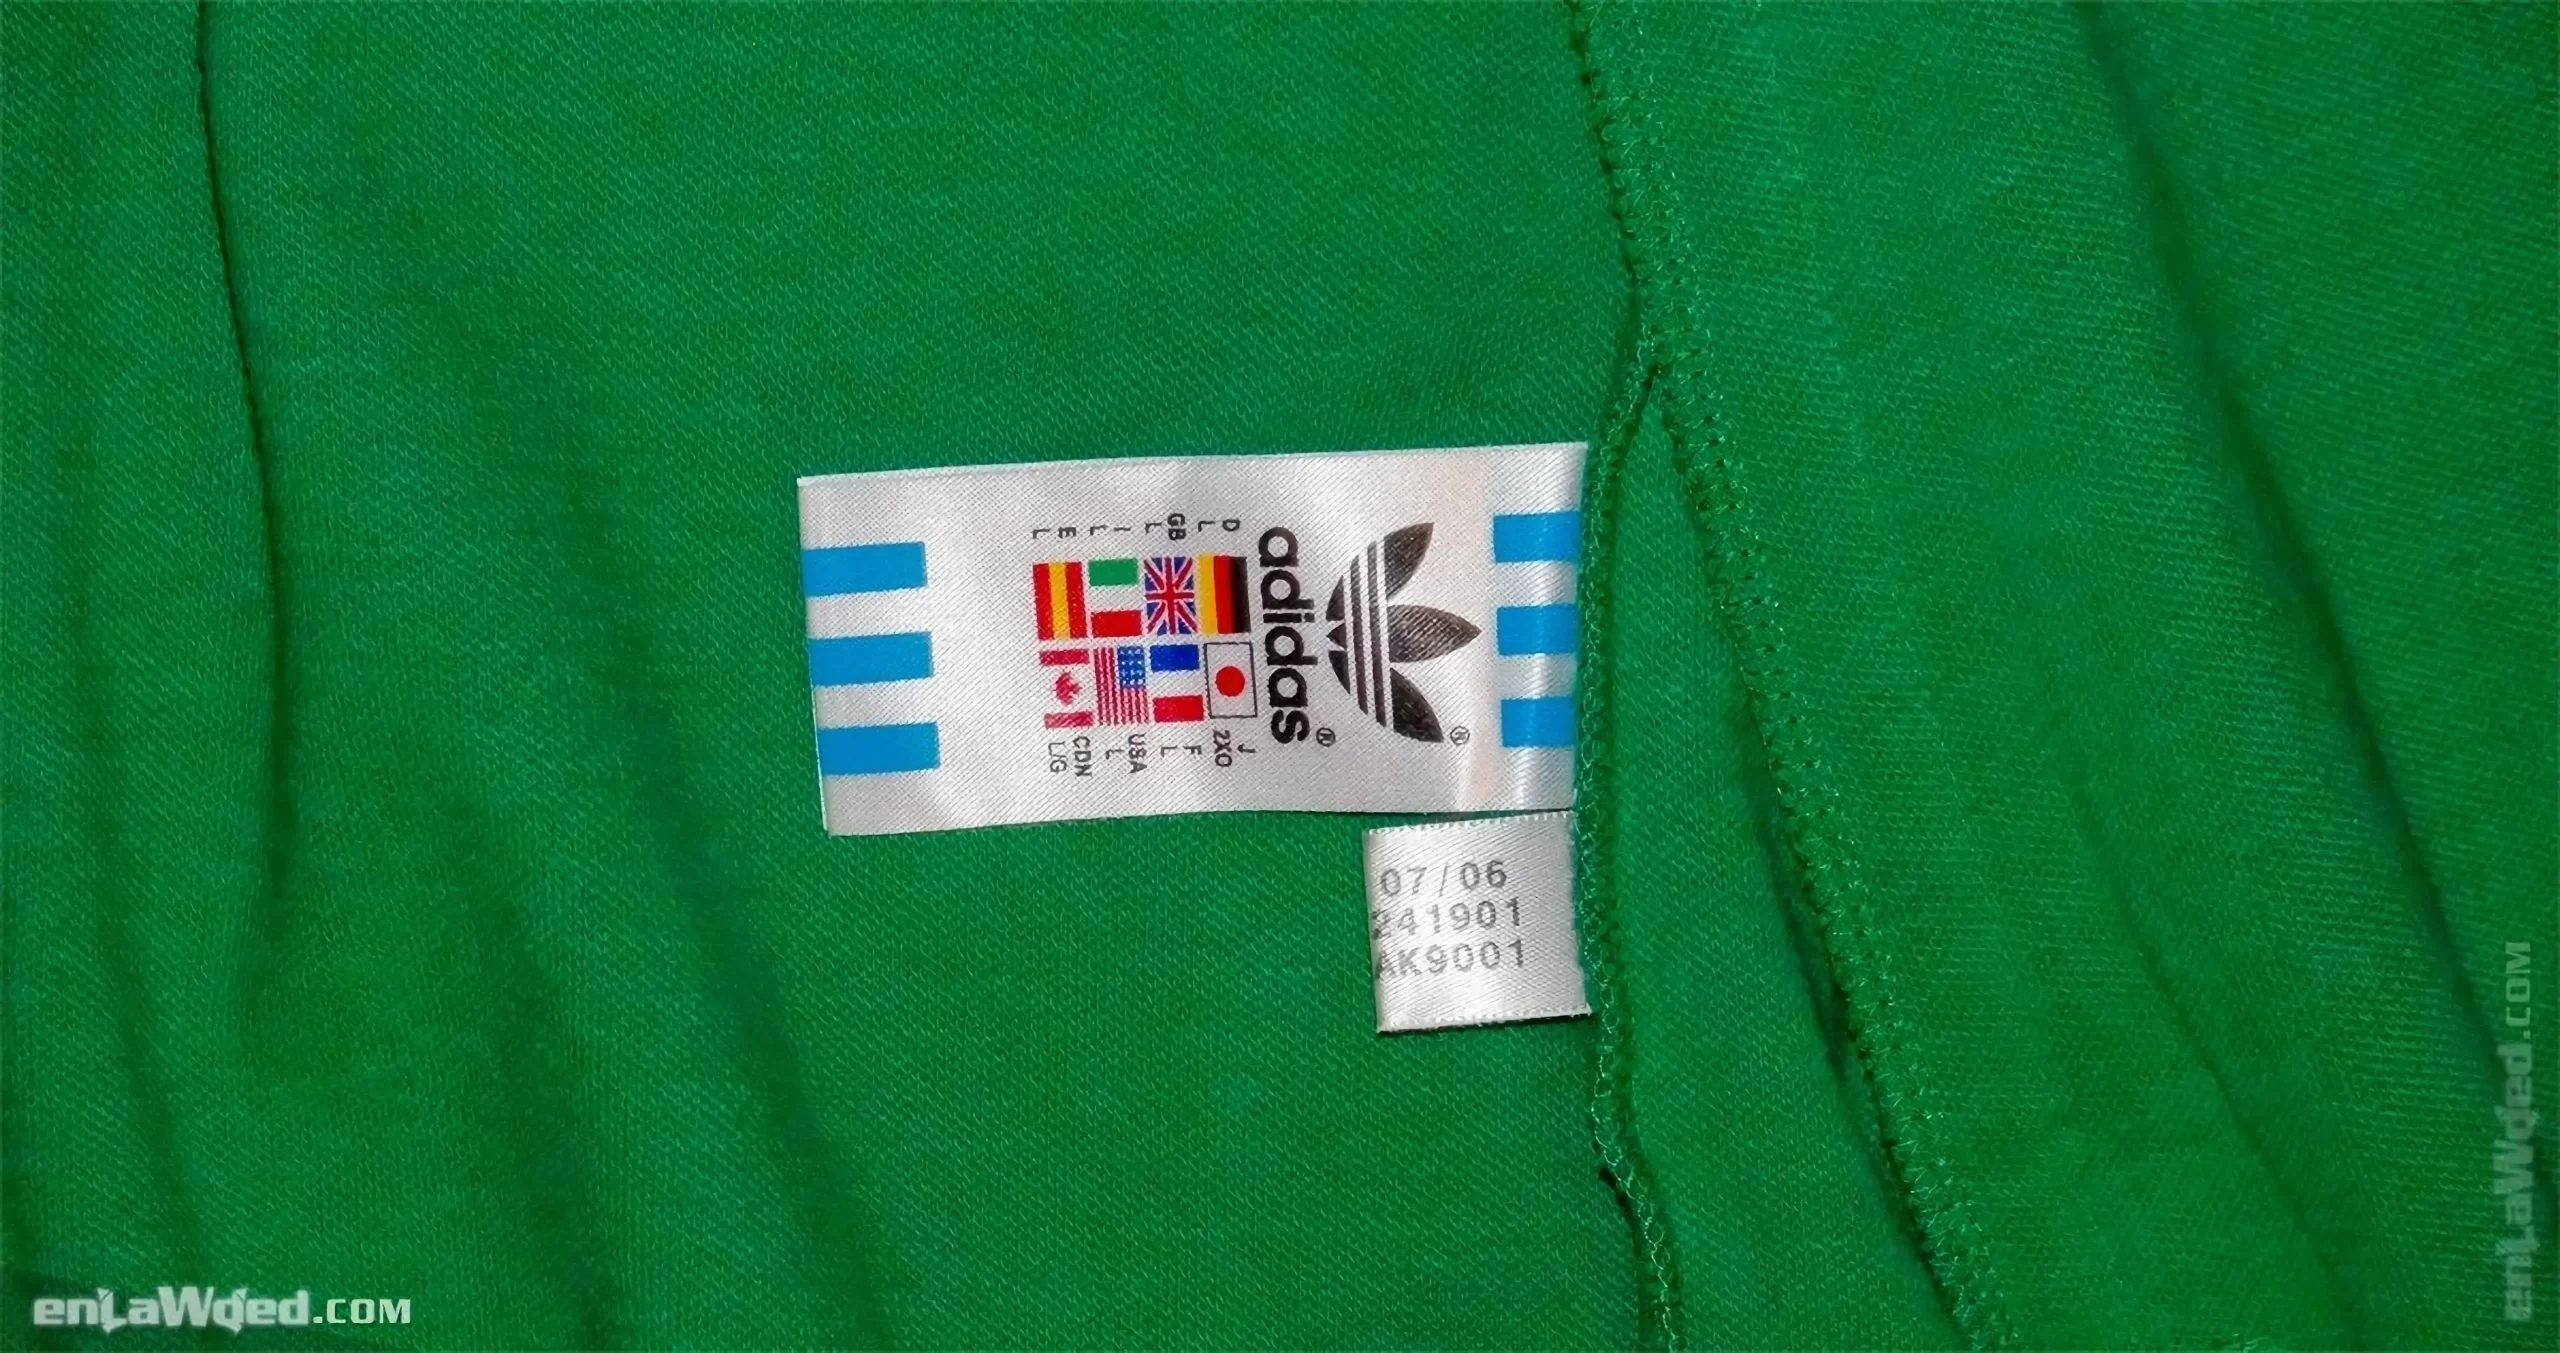 Adidas tag of the Cape Town jacket, with the month and year of fabrication: 07/2006